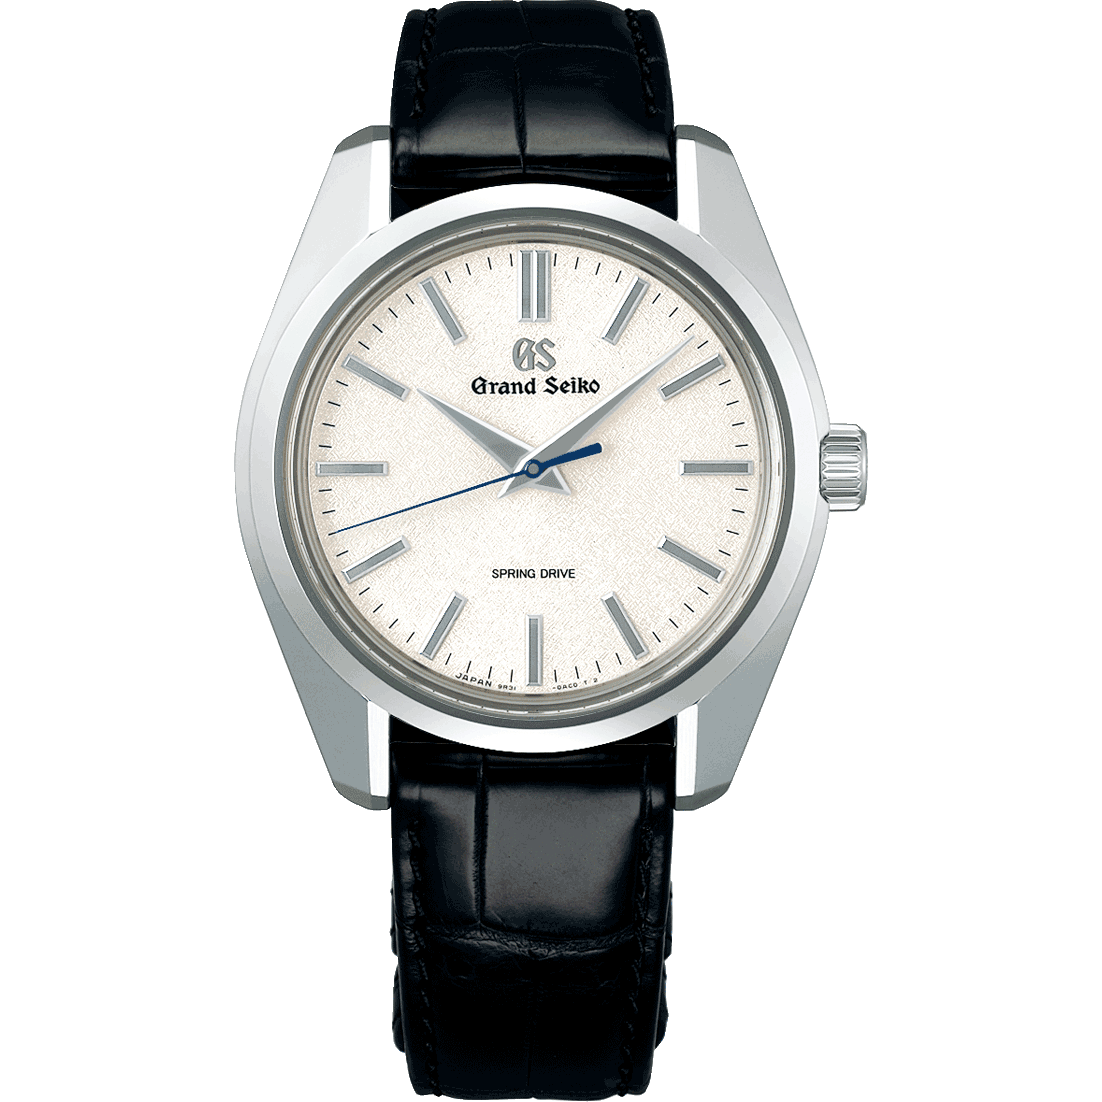 Grand Seiko White Dial watch with 44GS stainless steel case. 